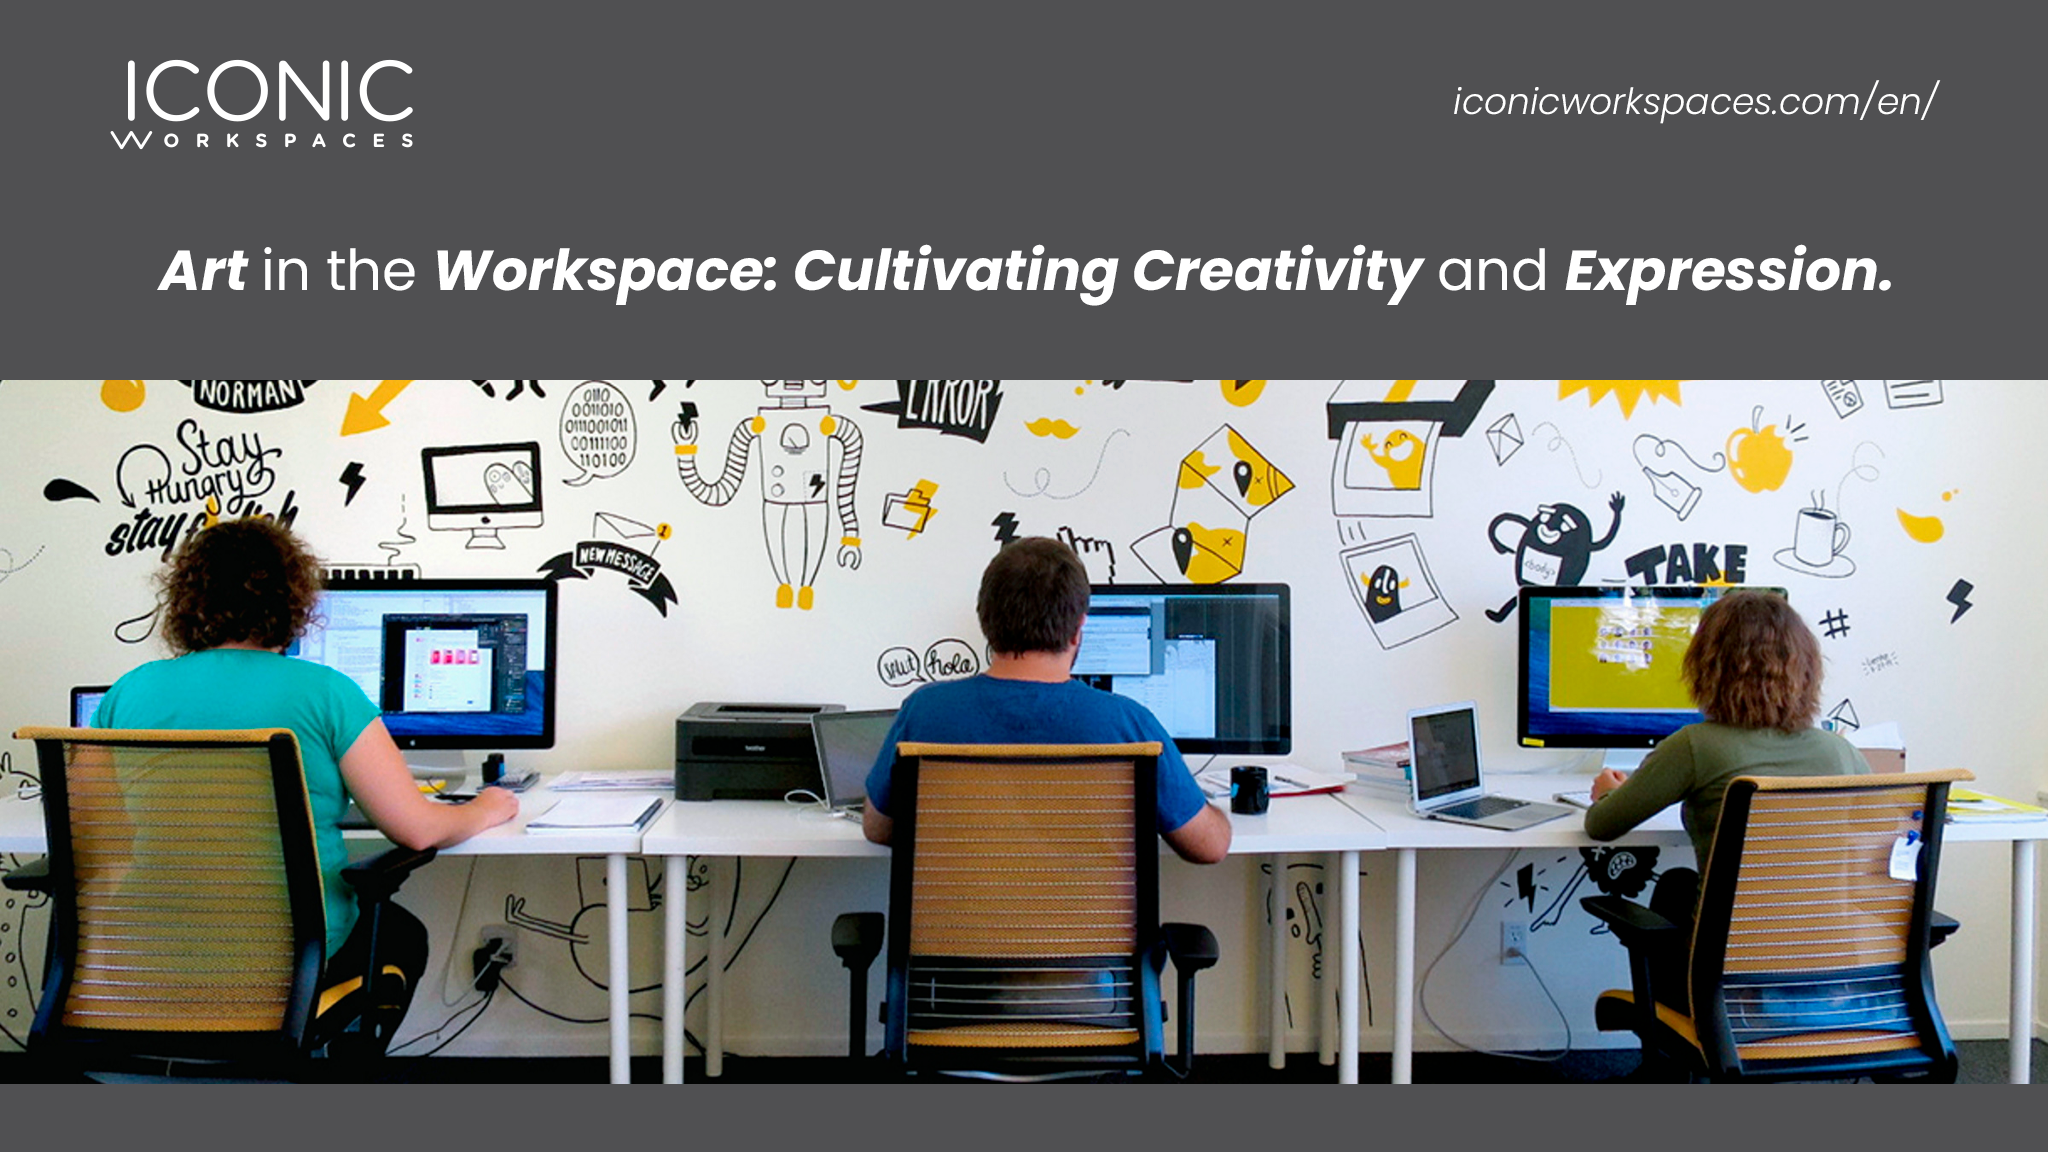 Art in the Workspace: Cultivating Creativity and Expression